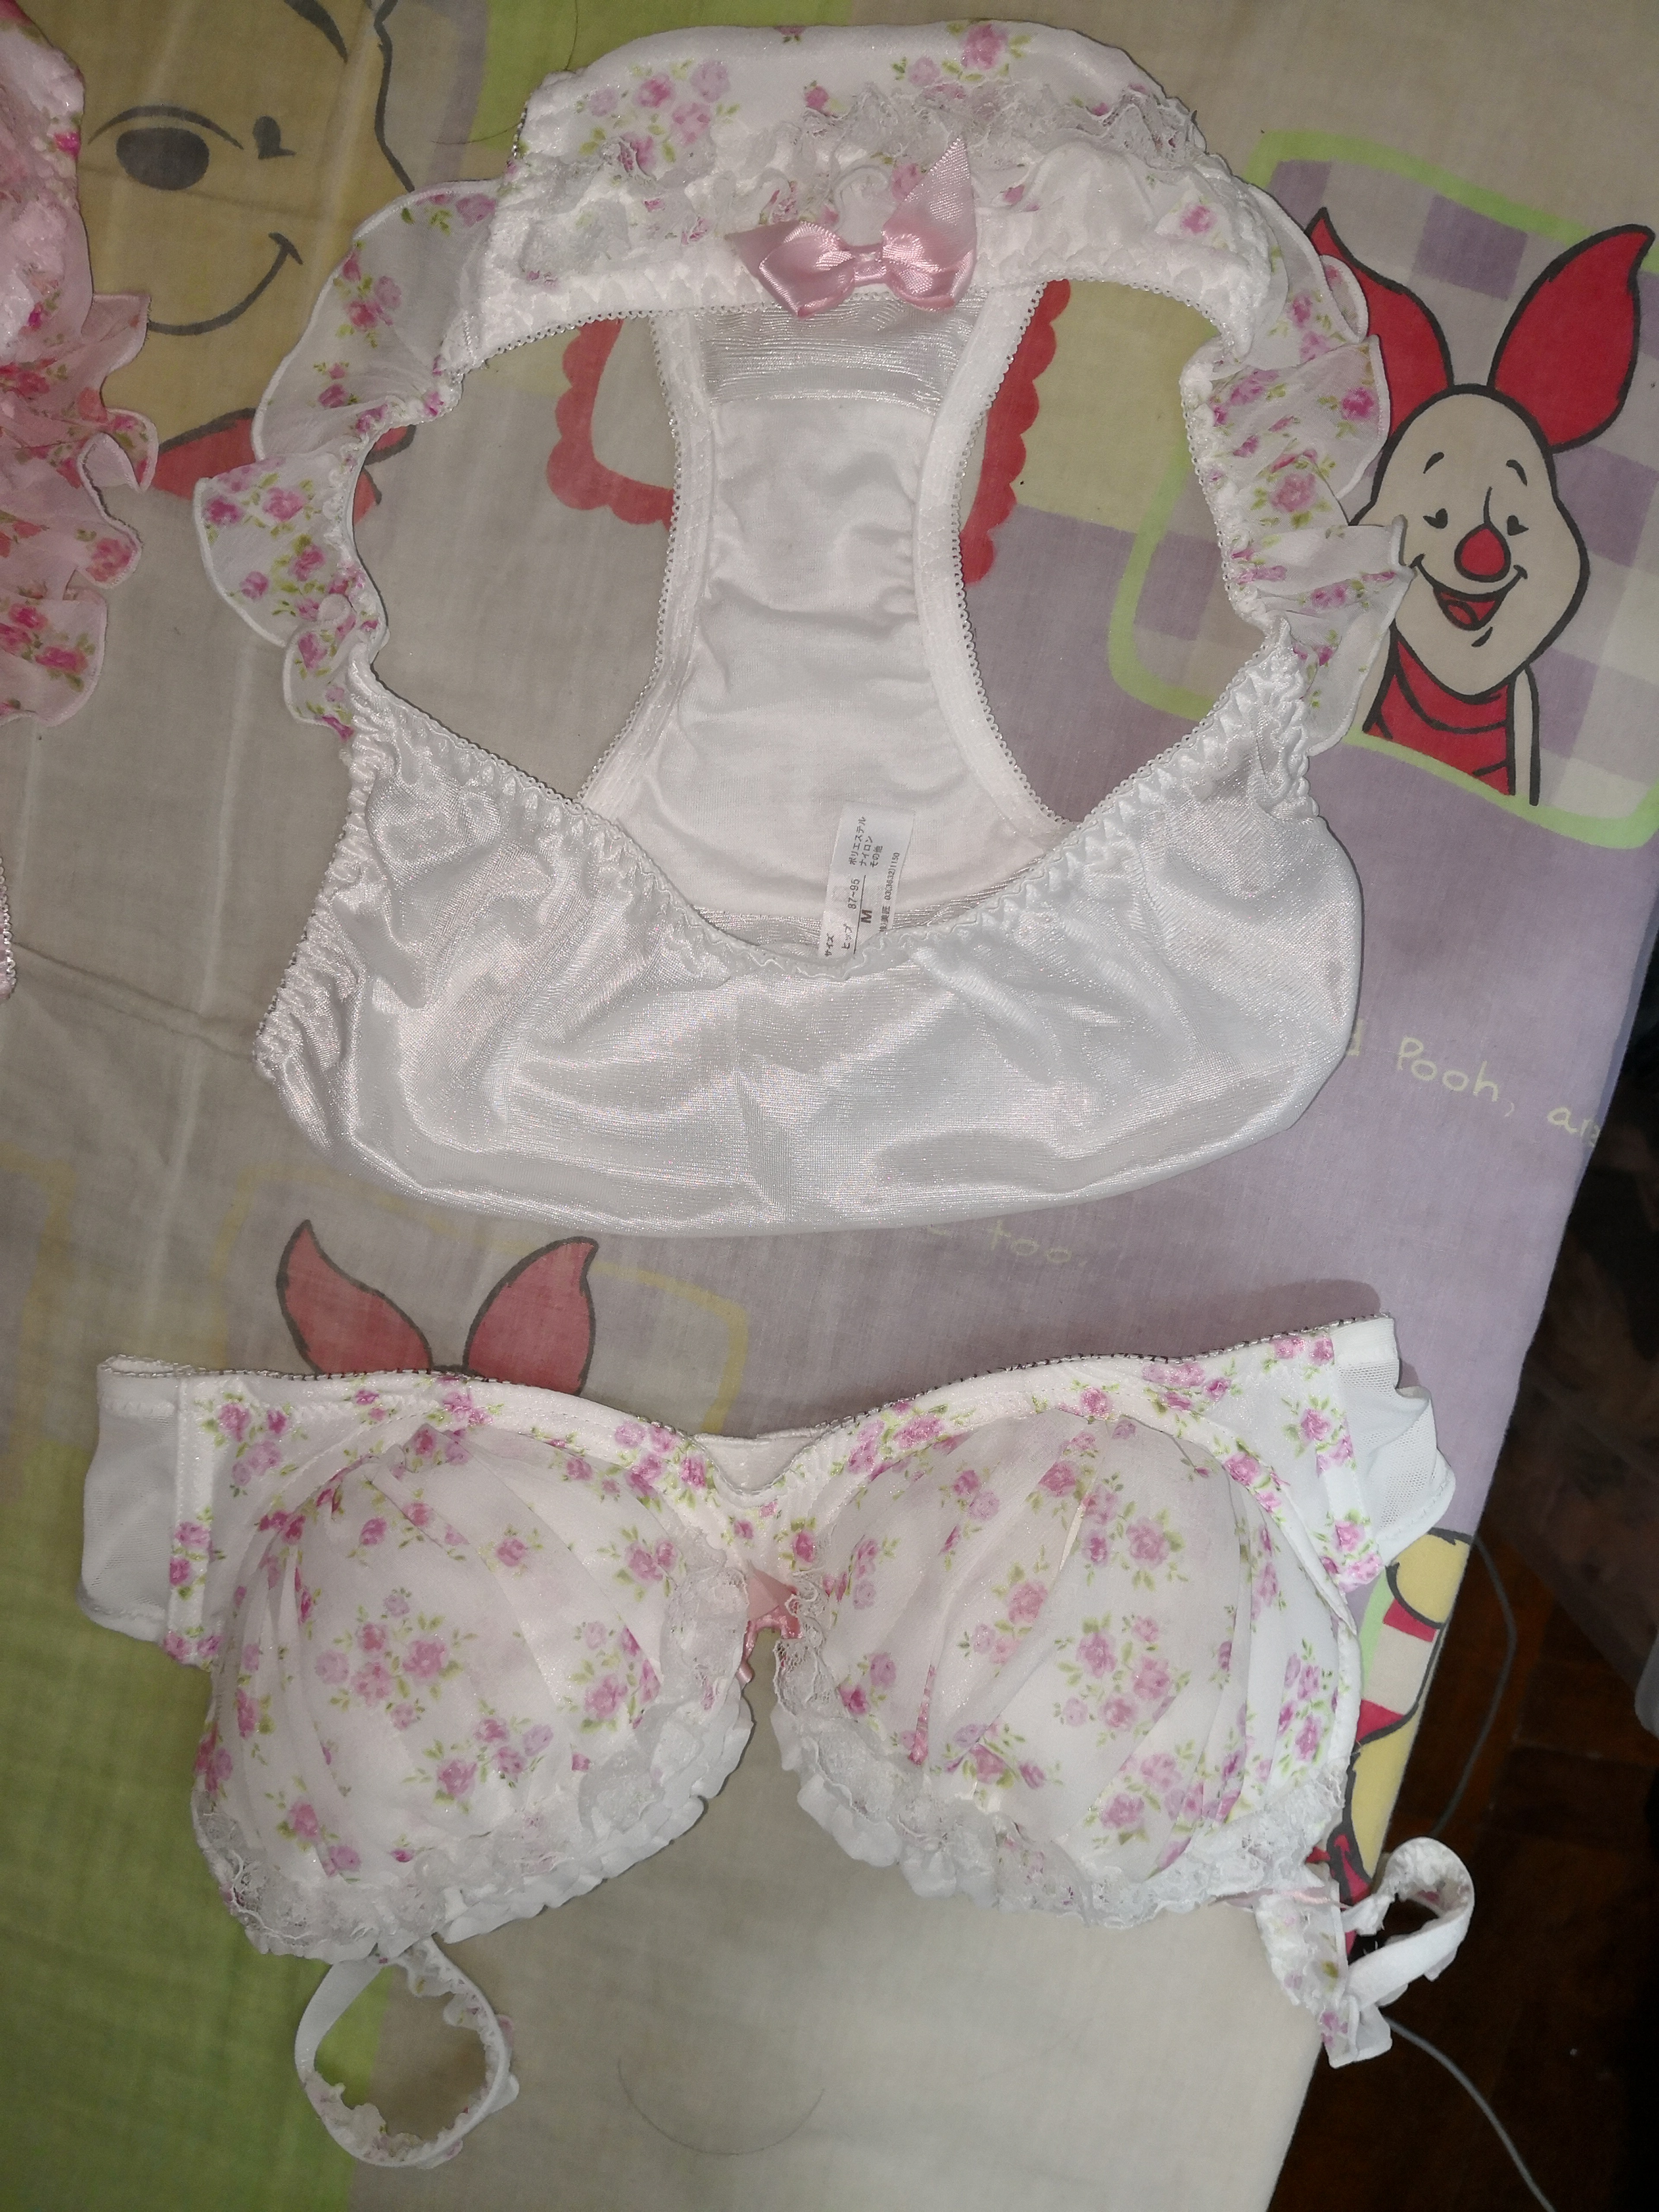 A new and clean cute white flower pattern panty before playing.